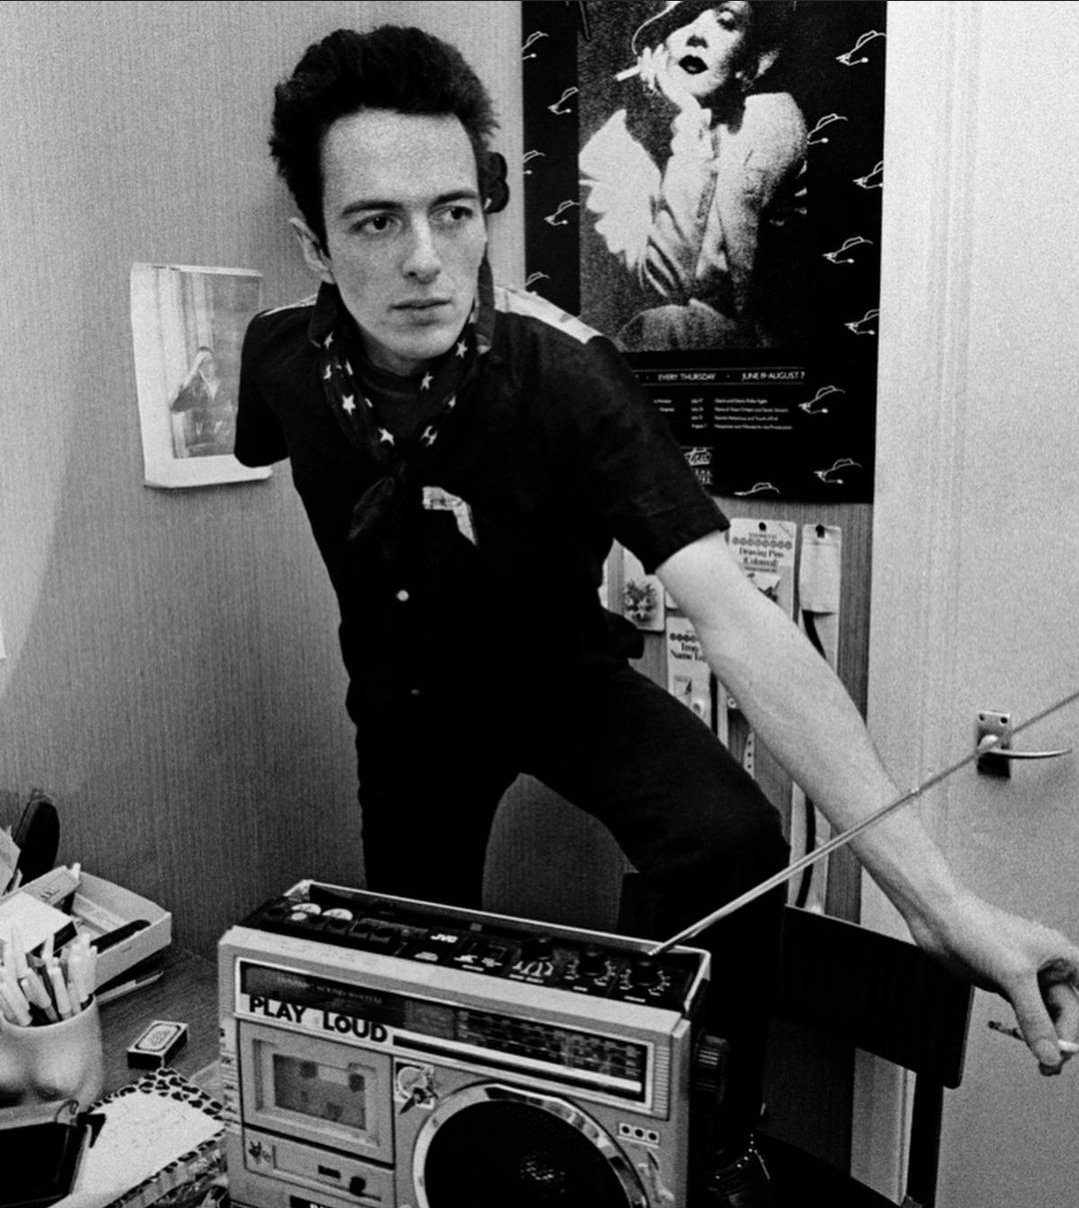 Happy birthday to Joe Strummer, the music industry could be much different if you were still around 